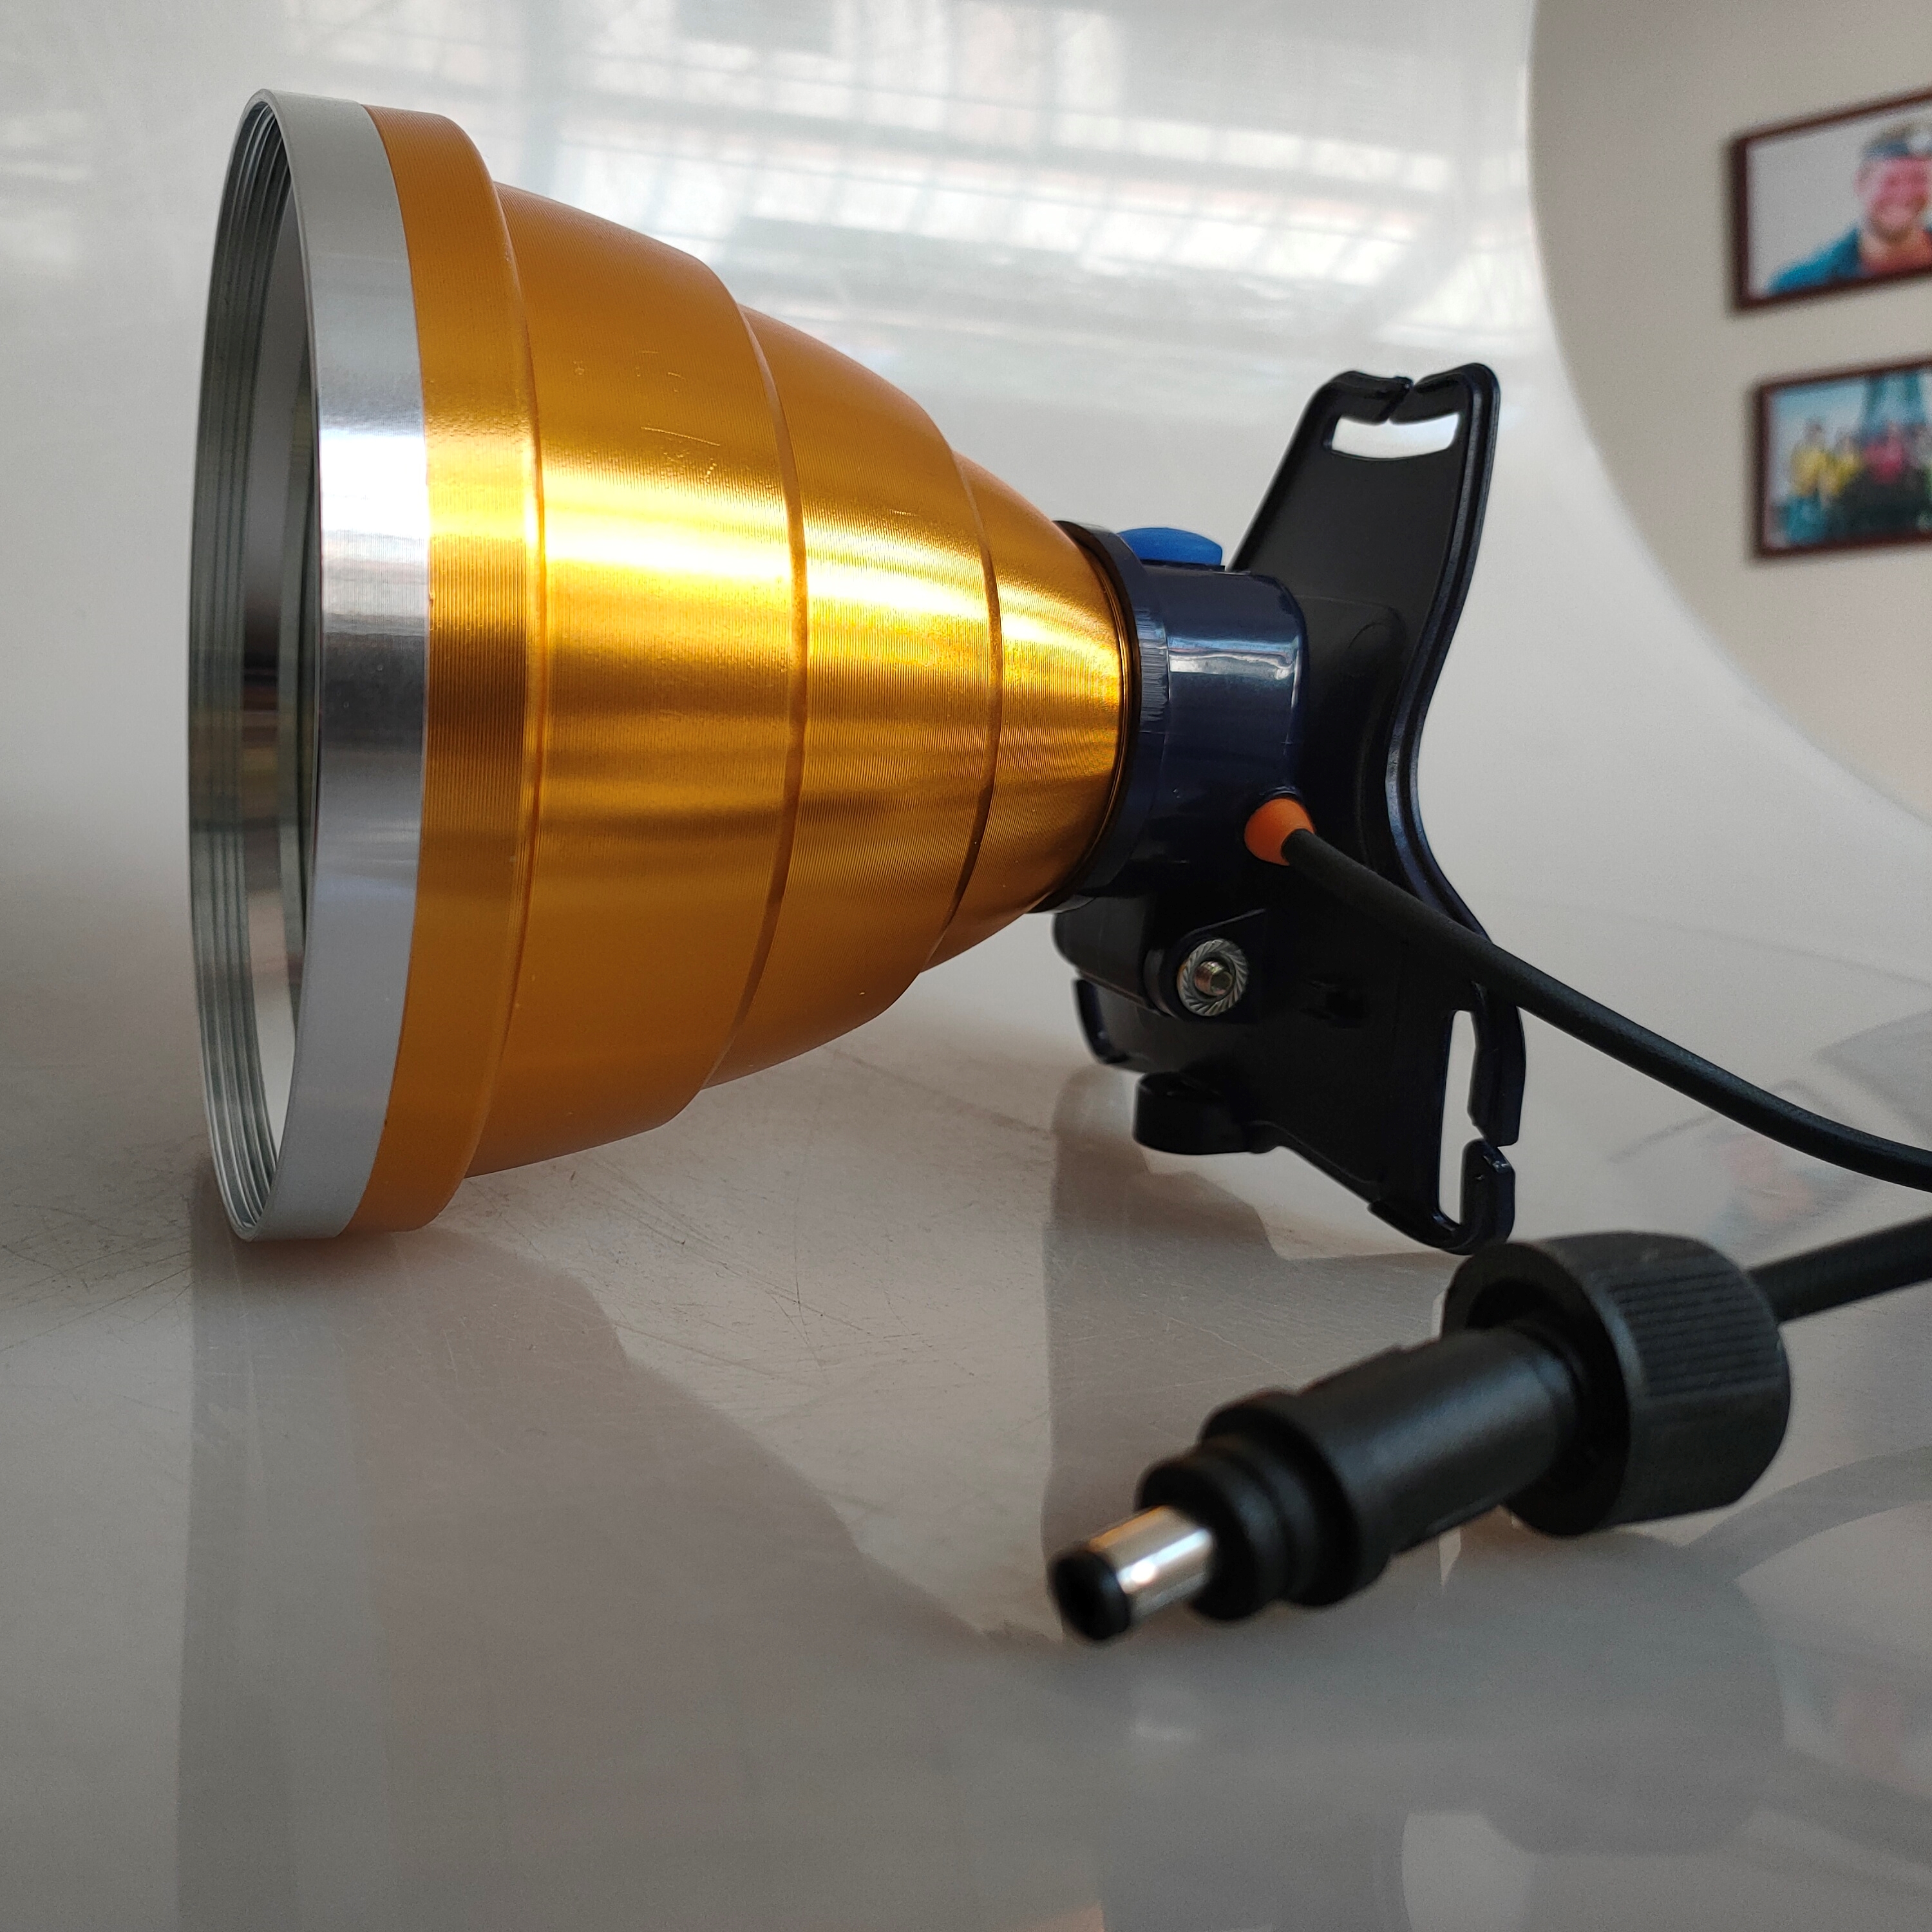 Jianhui convenient and controllable high-endurance engineering hand-held searchlight